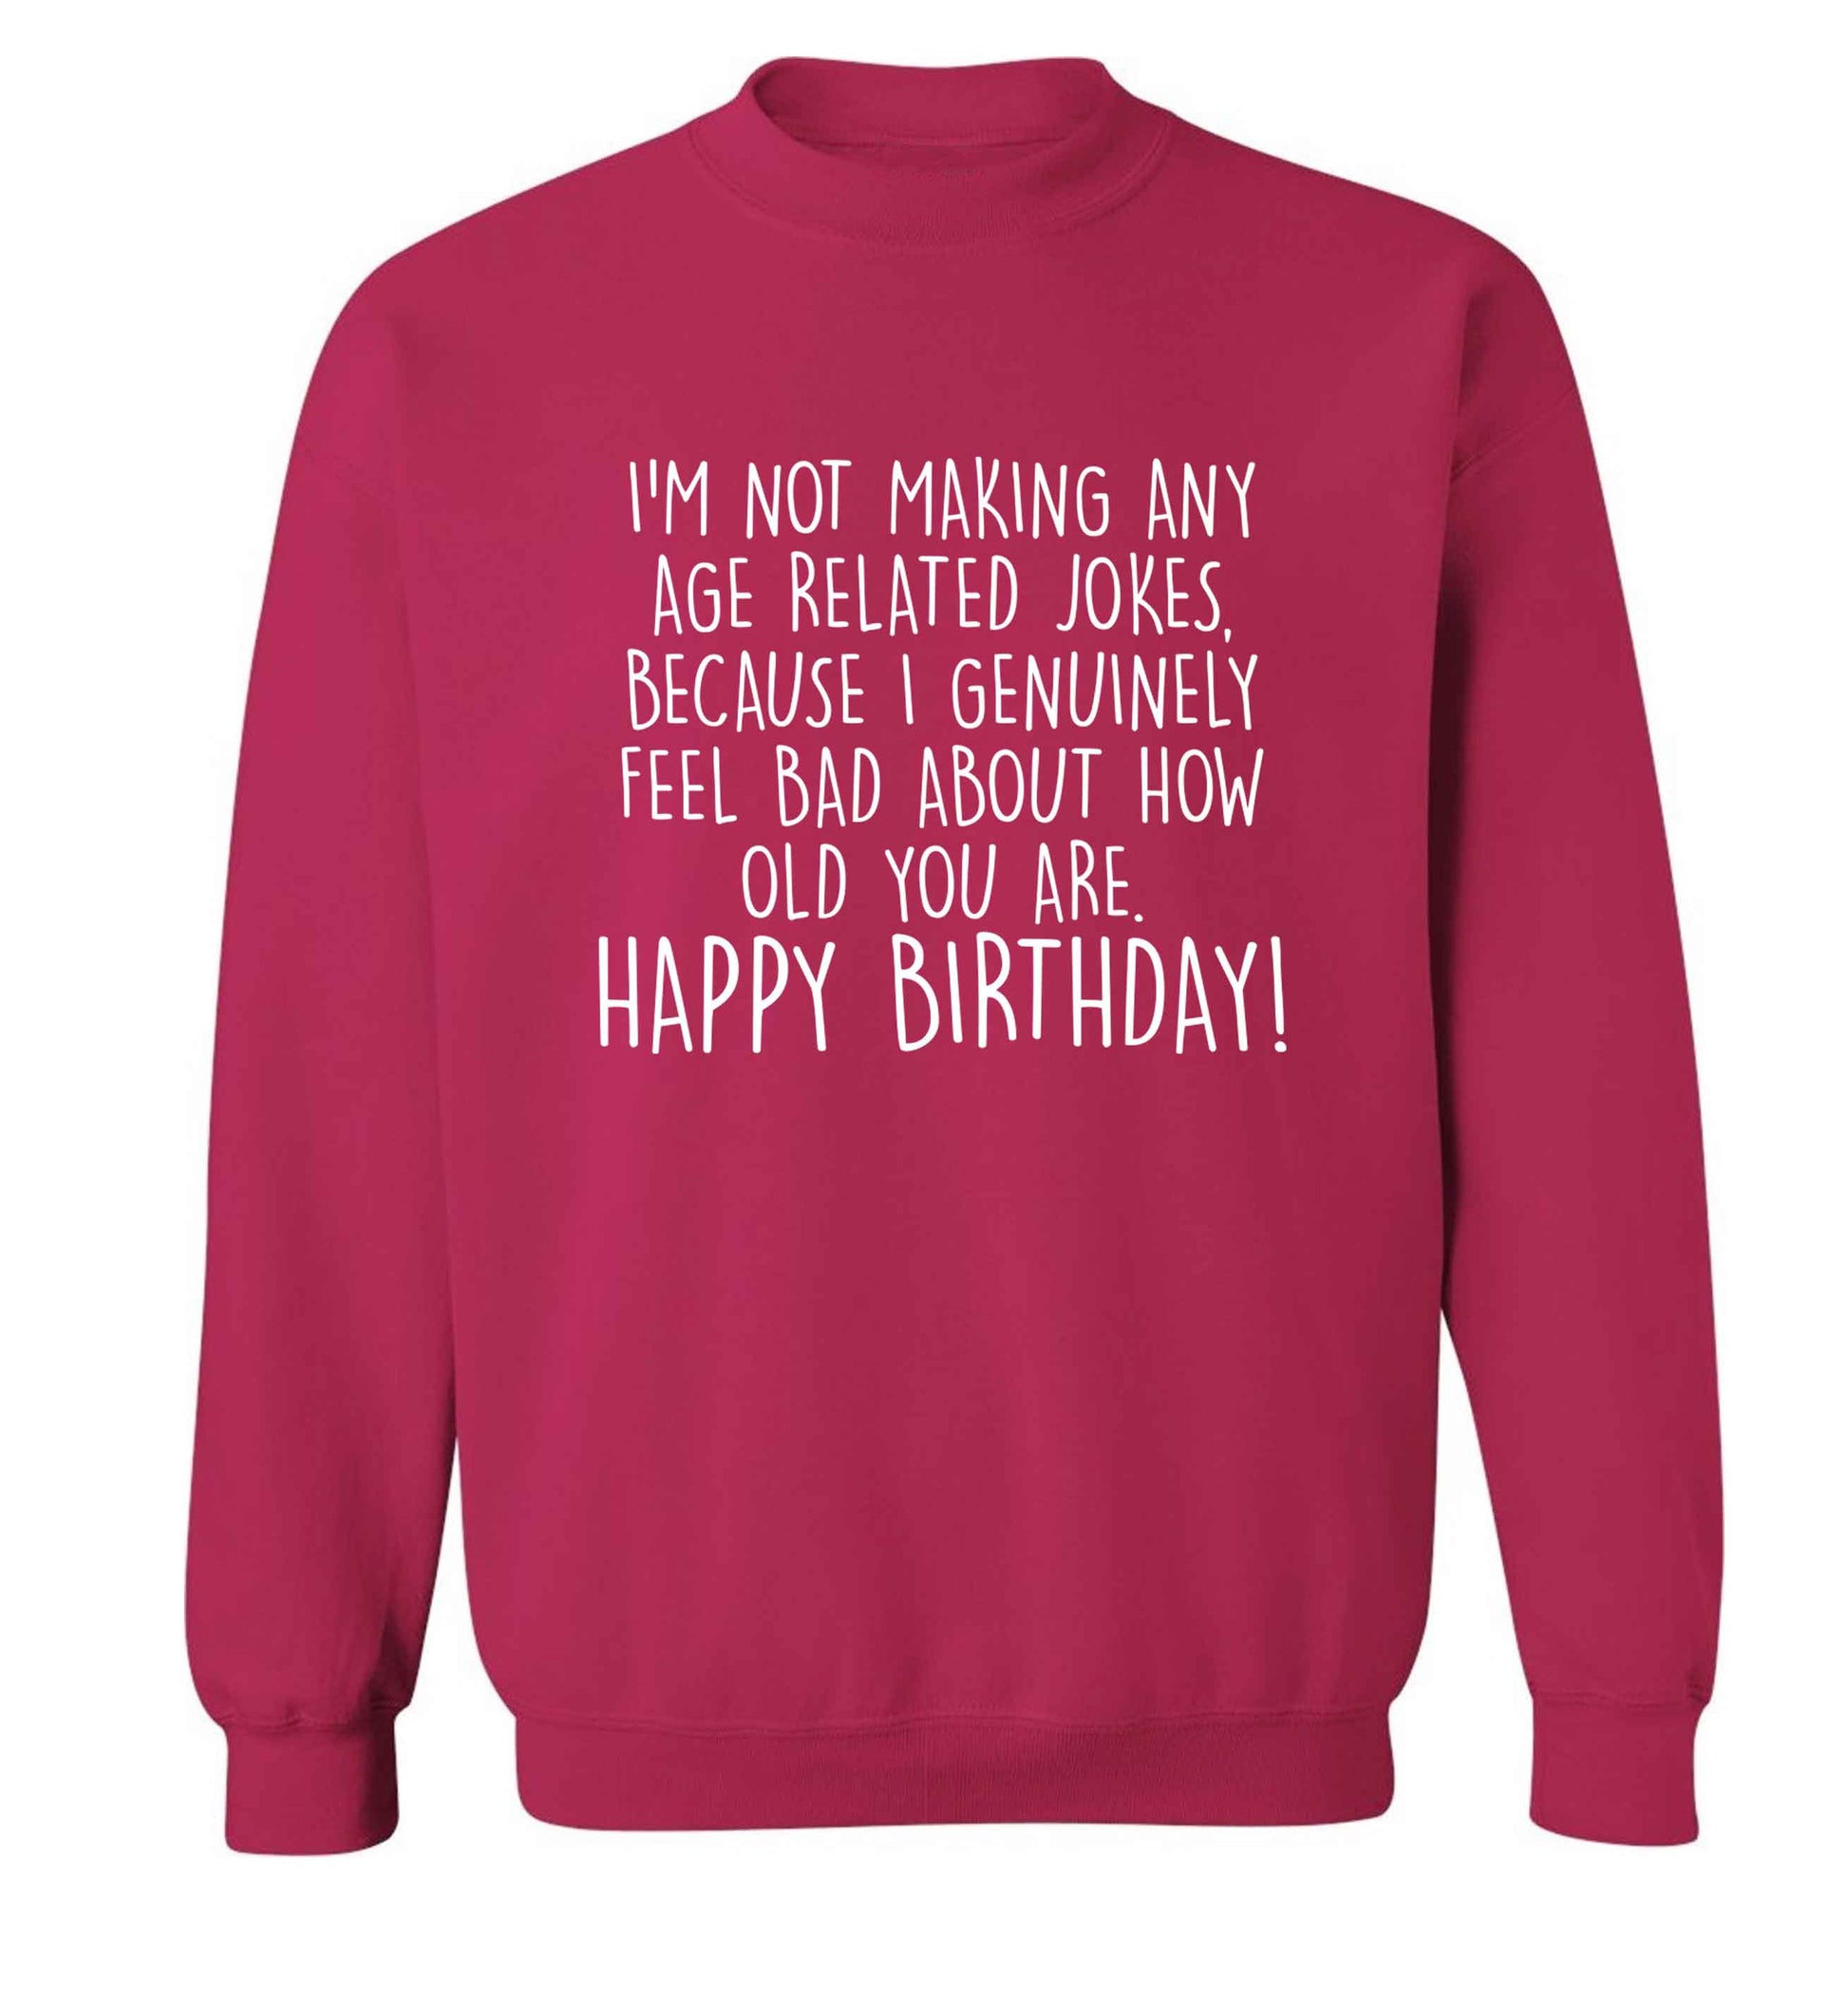 I'm not making any age related jokes because I genuinely feel bad for how old you are adult's unisex pink sweater 2XL